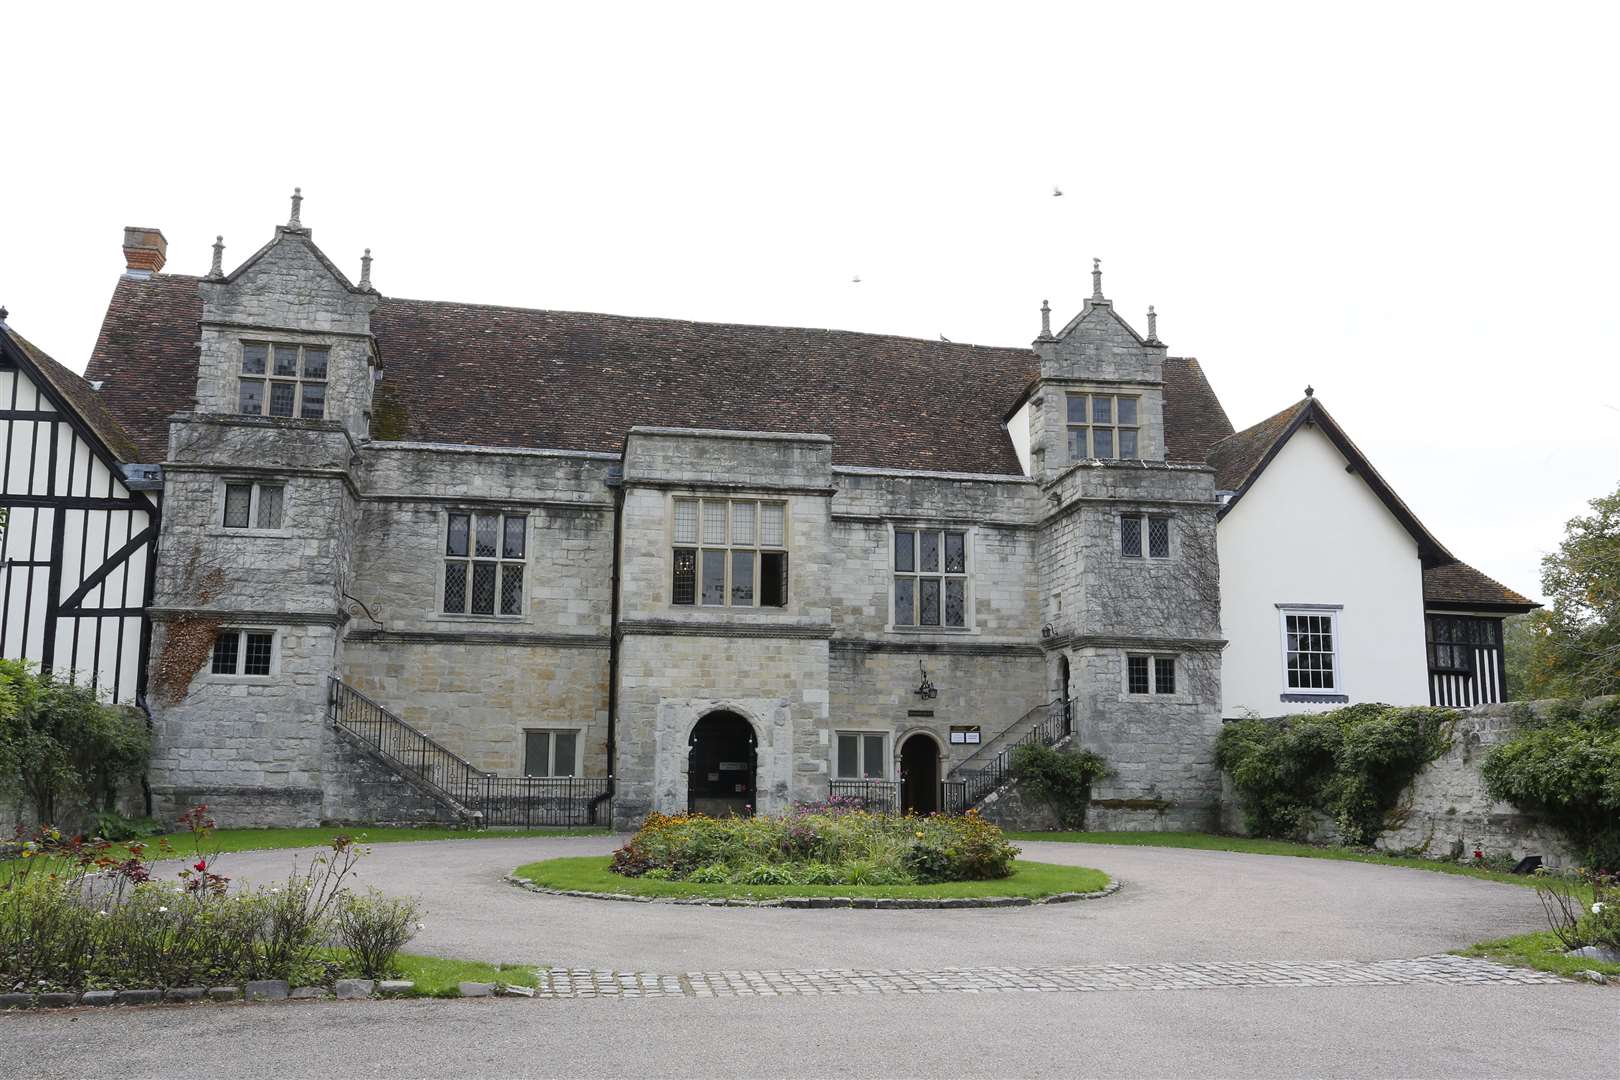 The inquest was held at the Archbishops Palace in Maidstone